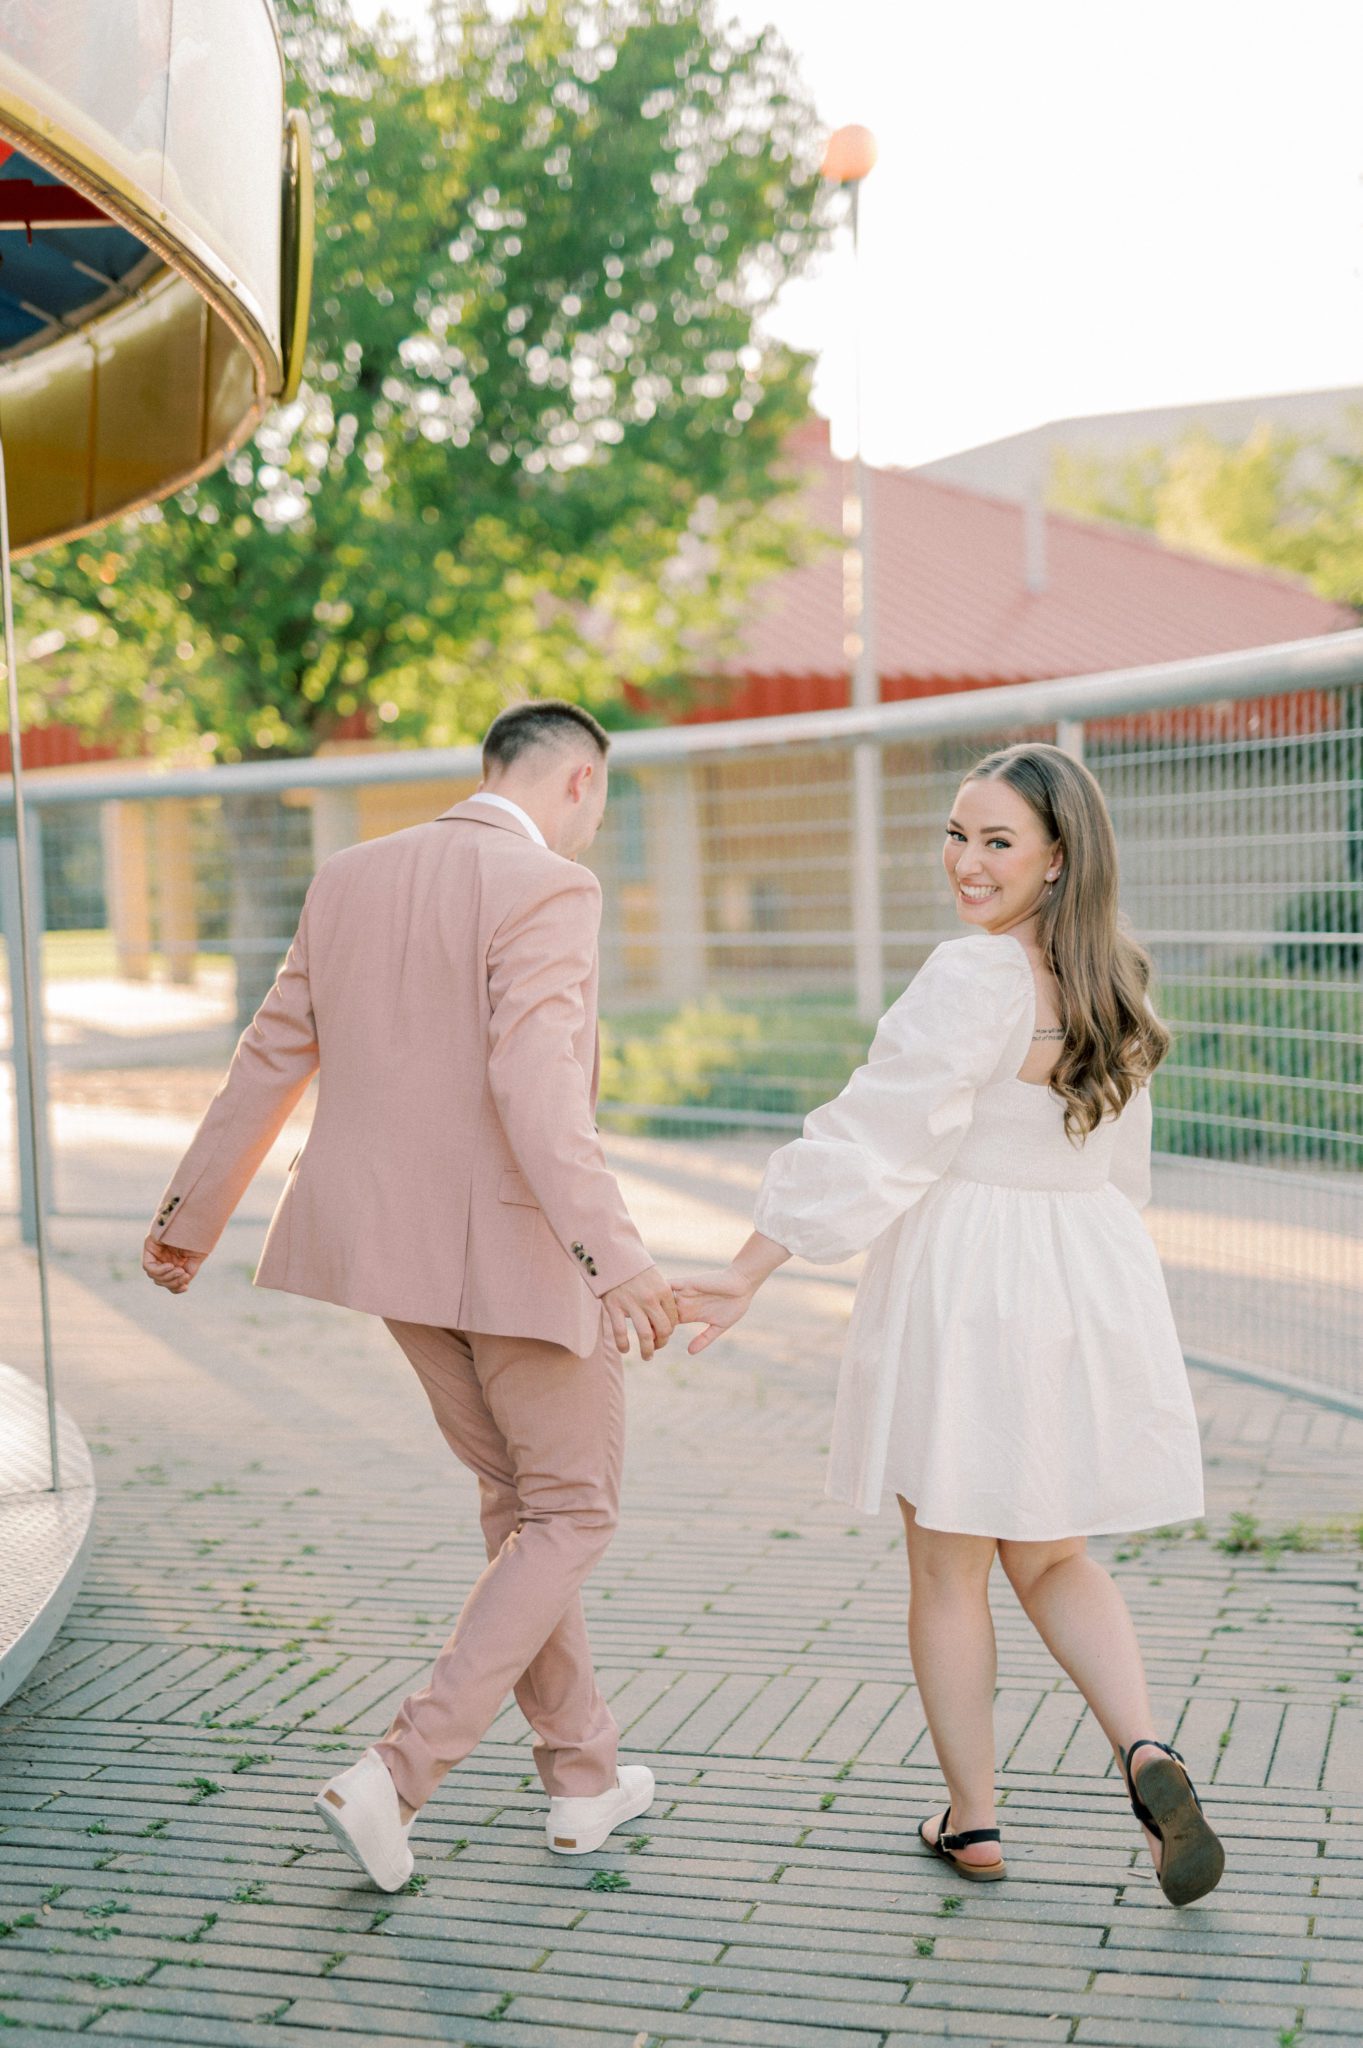 Unique engagement session location at outdoor carnival in summer